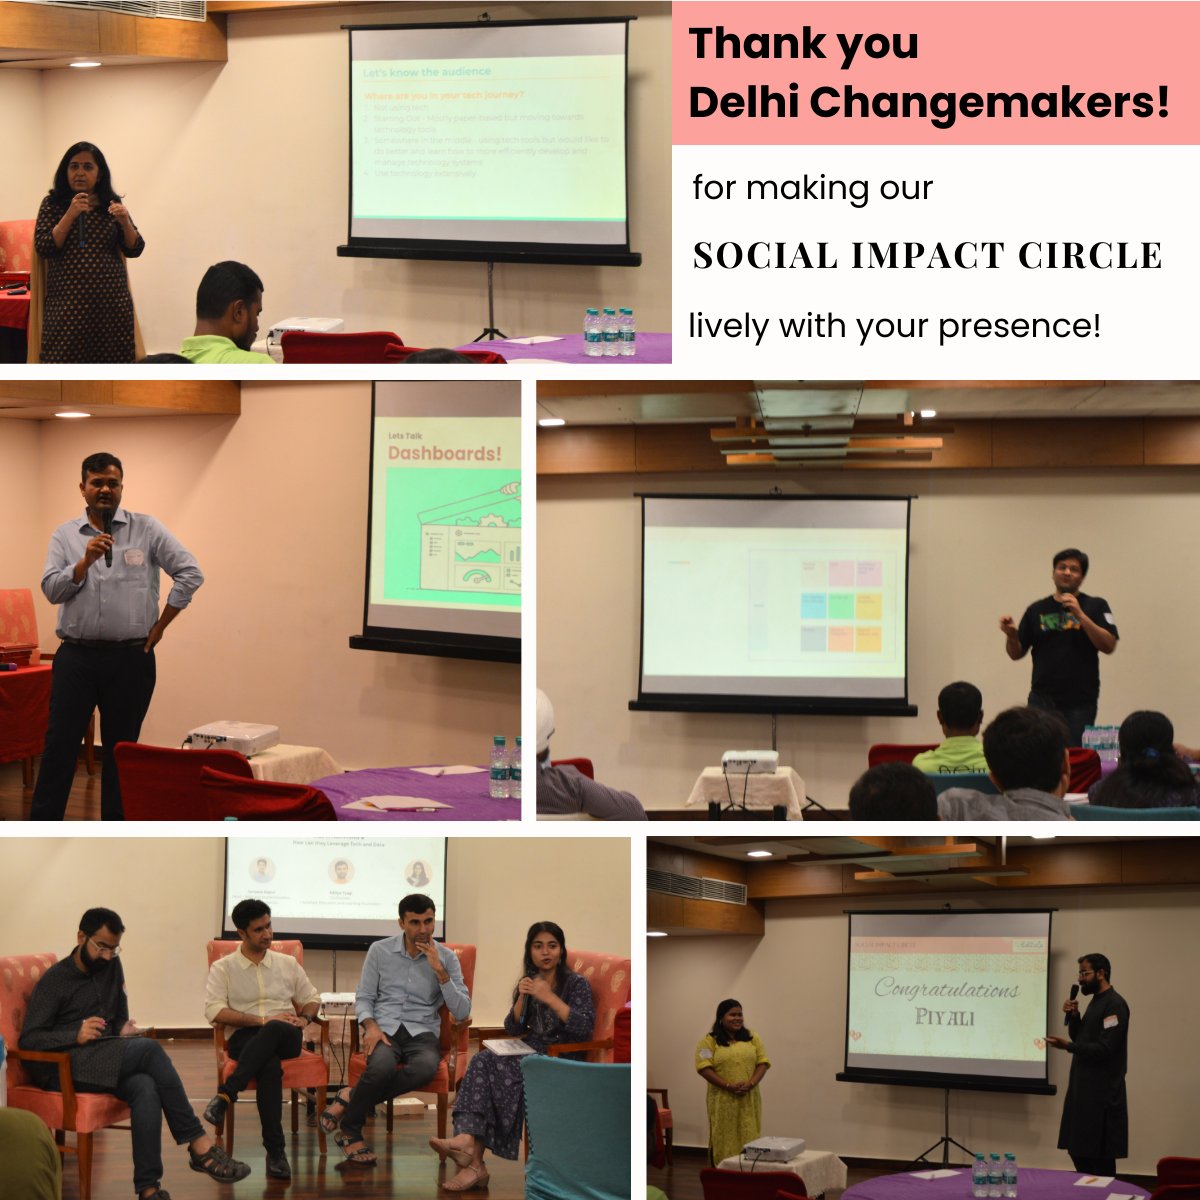 Thank you #NGOs & @PlatformCommons @dhwani_ris Project Tech4Dev @sefconnect @iSakshamWork @theantarafndn Tech for Social Good for being a part of our Delhi Social Impact Circle! 🙏😄 Your participation added tremendous value to the event as a whole! #tech4good#gratitude